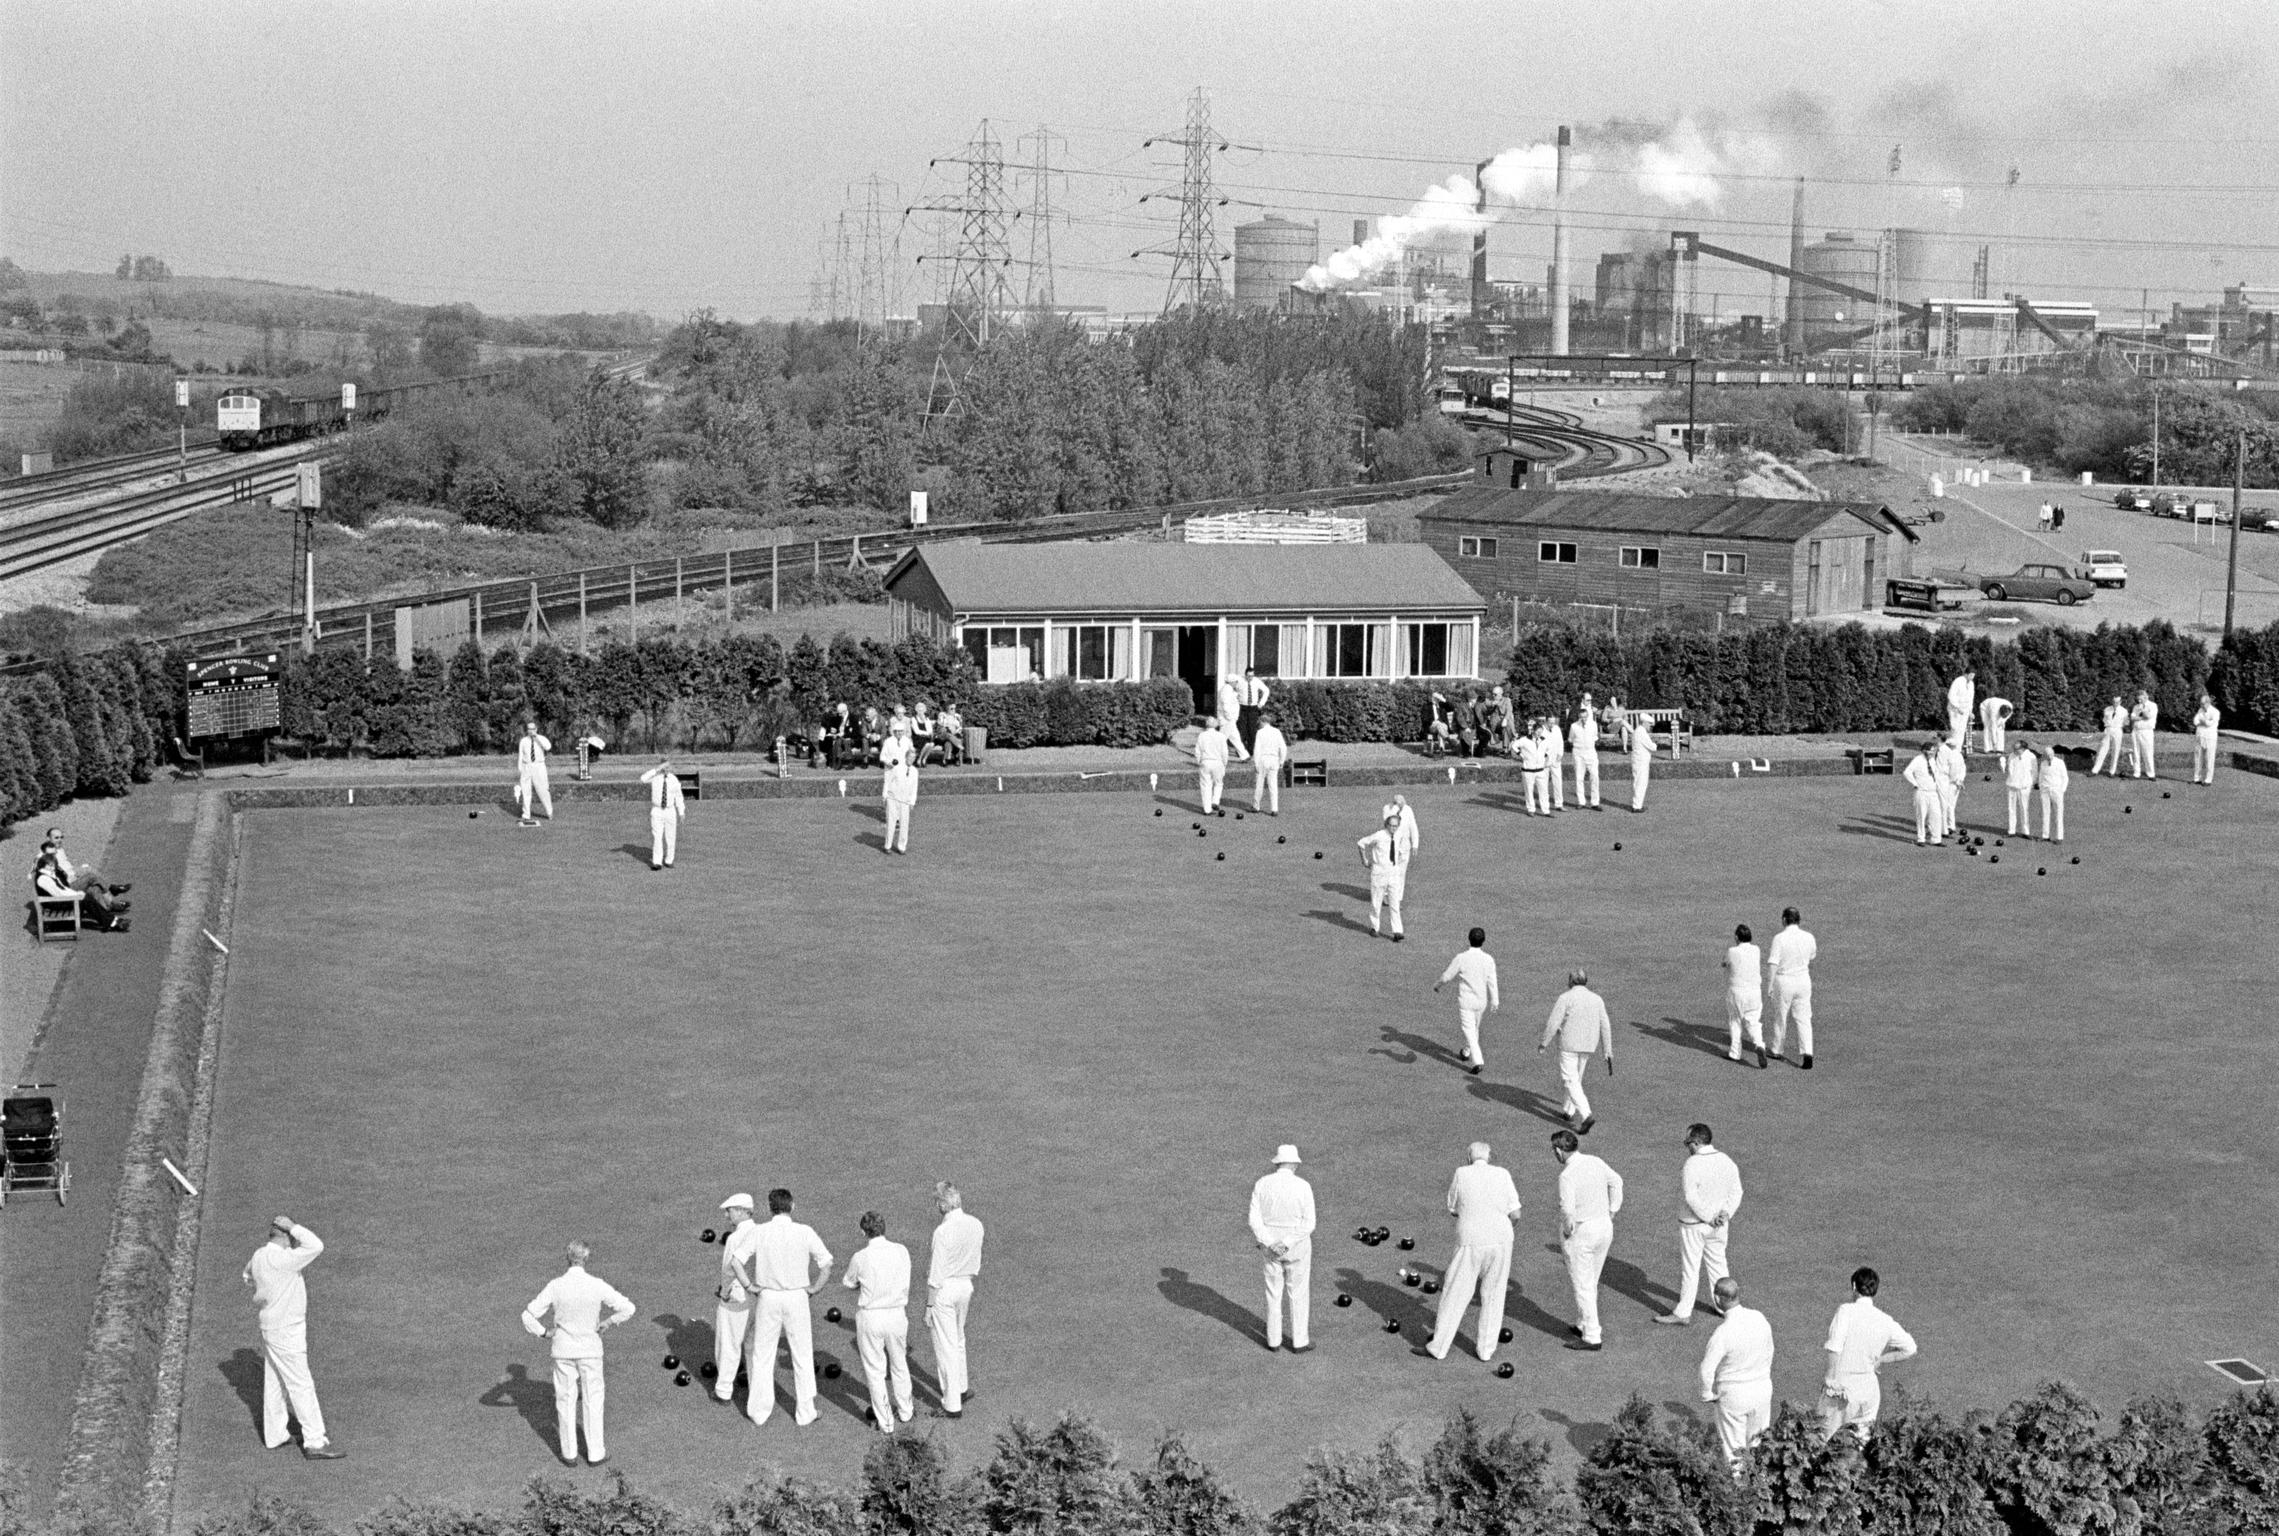 The contrast between the healthy activity of Newport Bowling Club, all wearing their whites battling the dirt and pollution of Llanwern steel works in the background. Newport, Wales